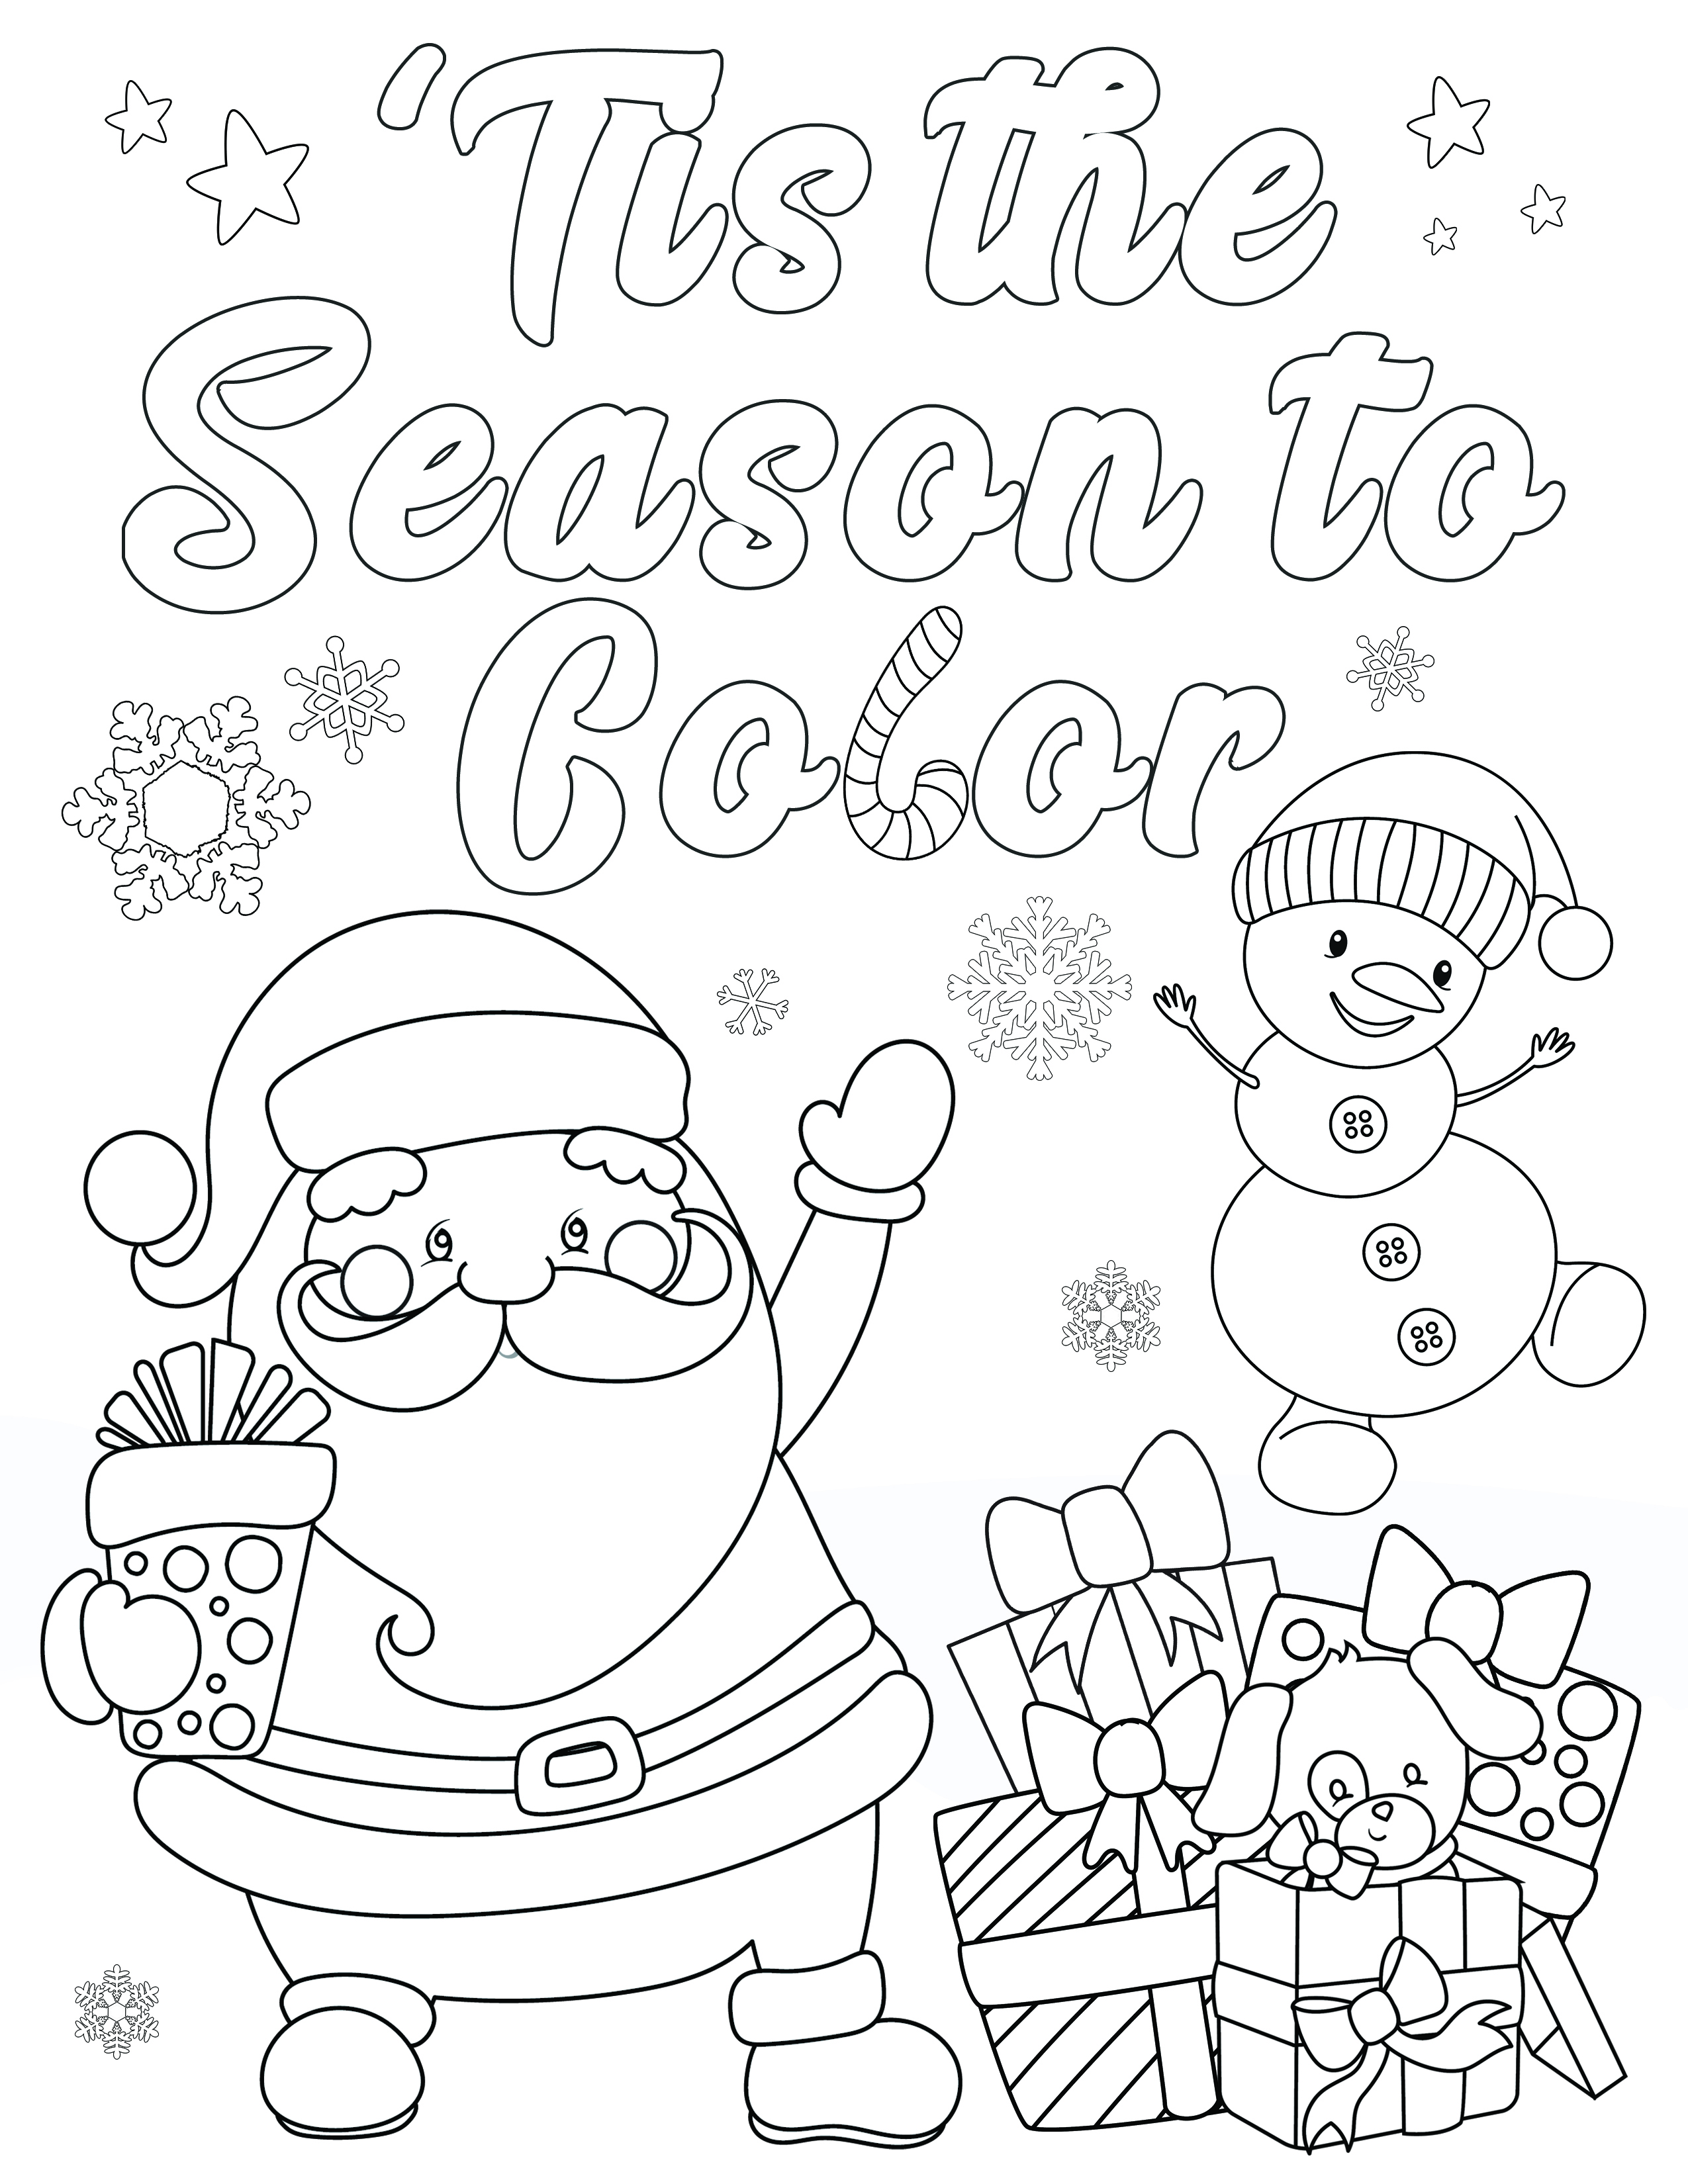 free-christmas-coloring-pages-for-adults-and-kids-happiness-is-homemade